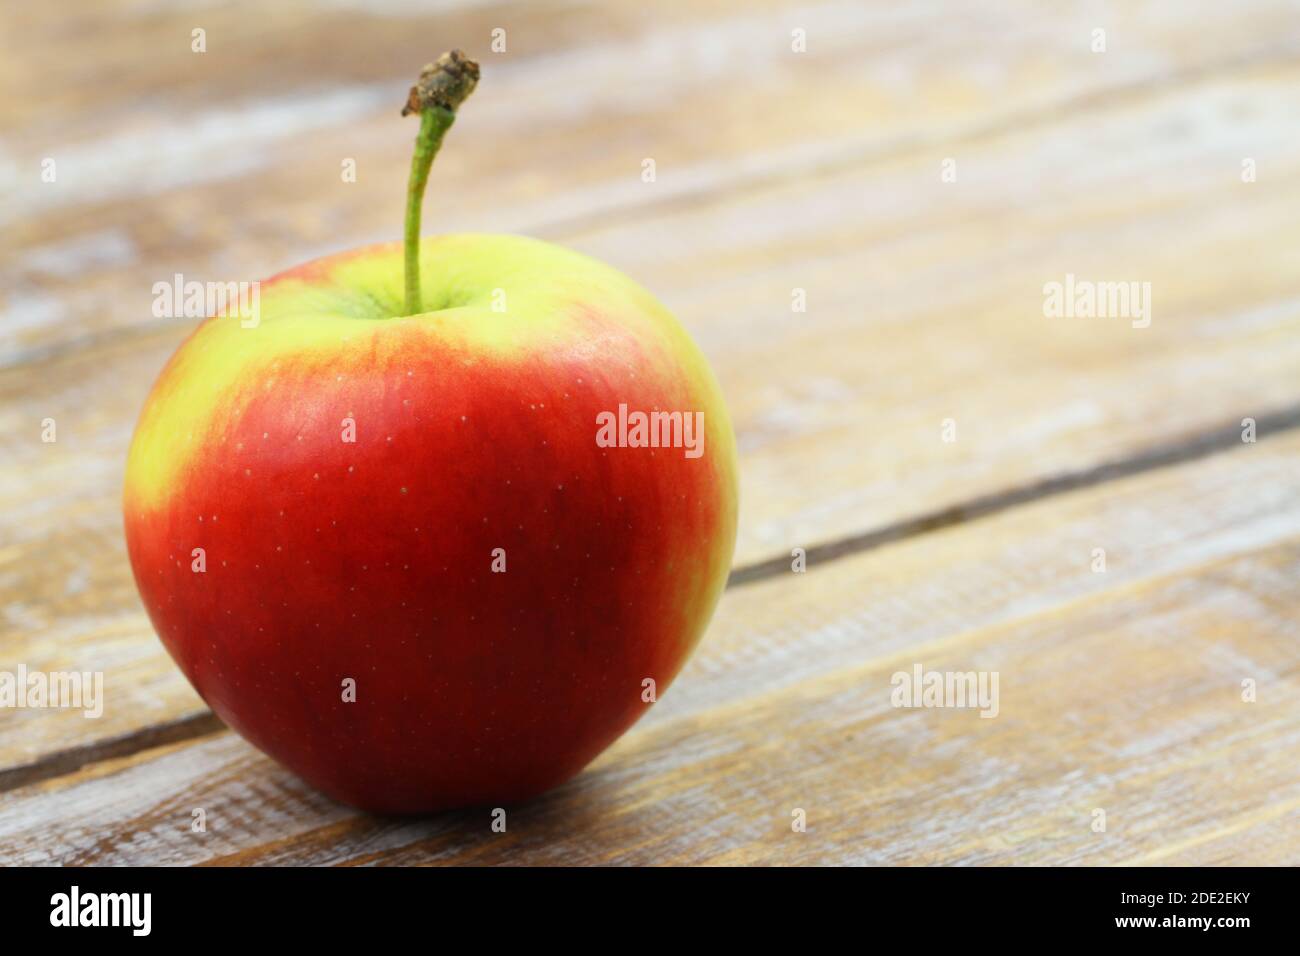 Red and yellow apple on wooden surface with copy space Stock Photo